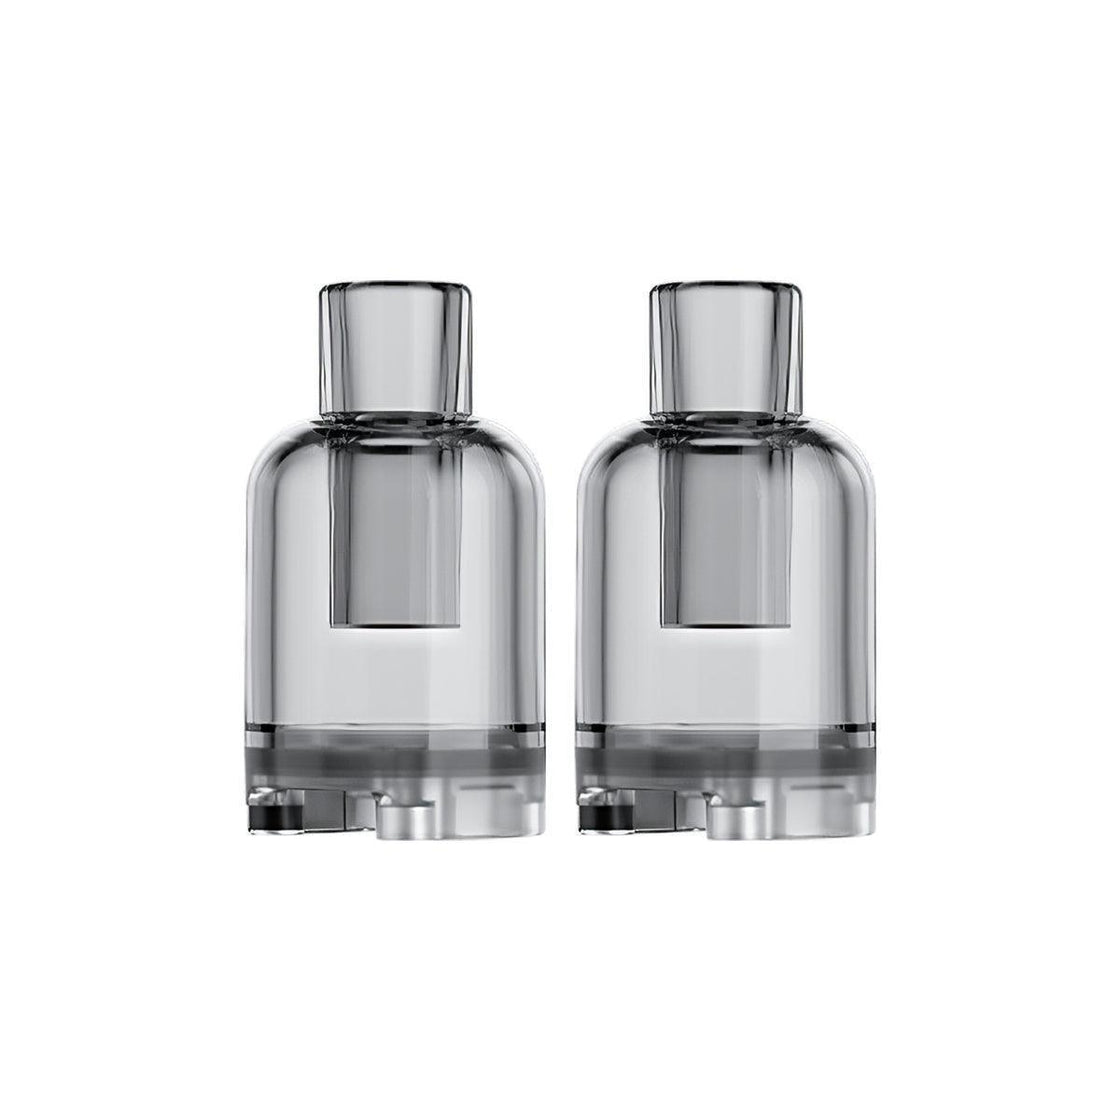 VAPORESSO X MOTI X MINI REPLACEMENT PODS XL - PACK OF 2 - Vapeslough